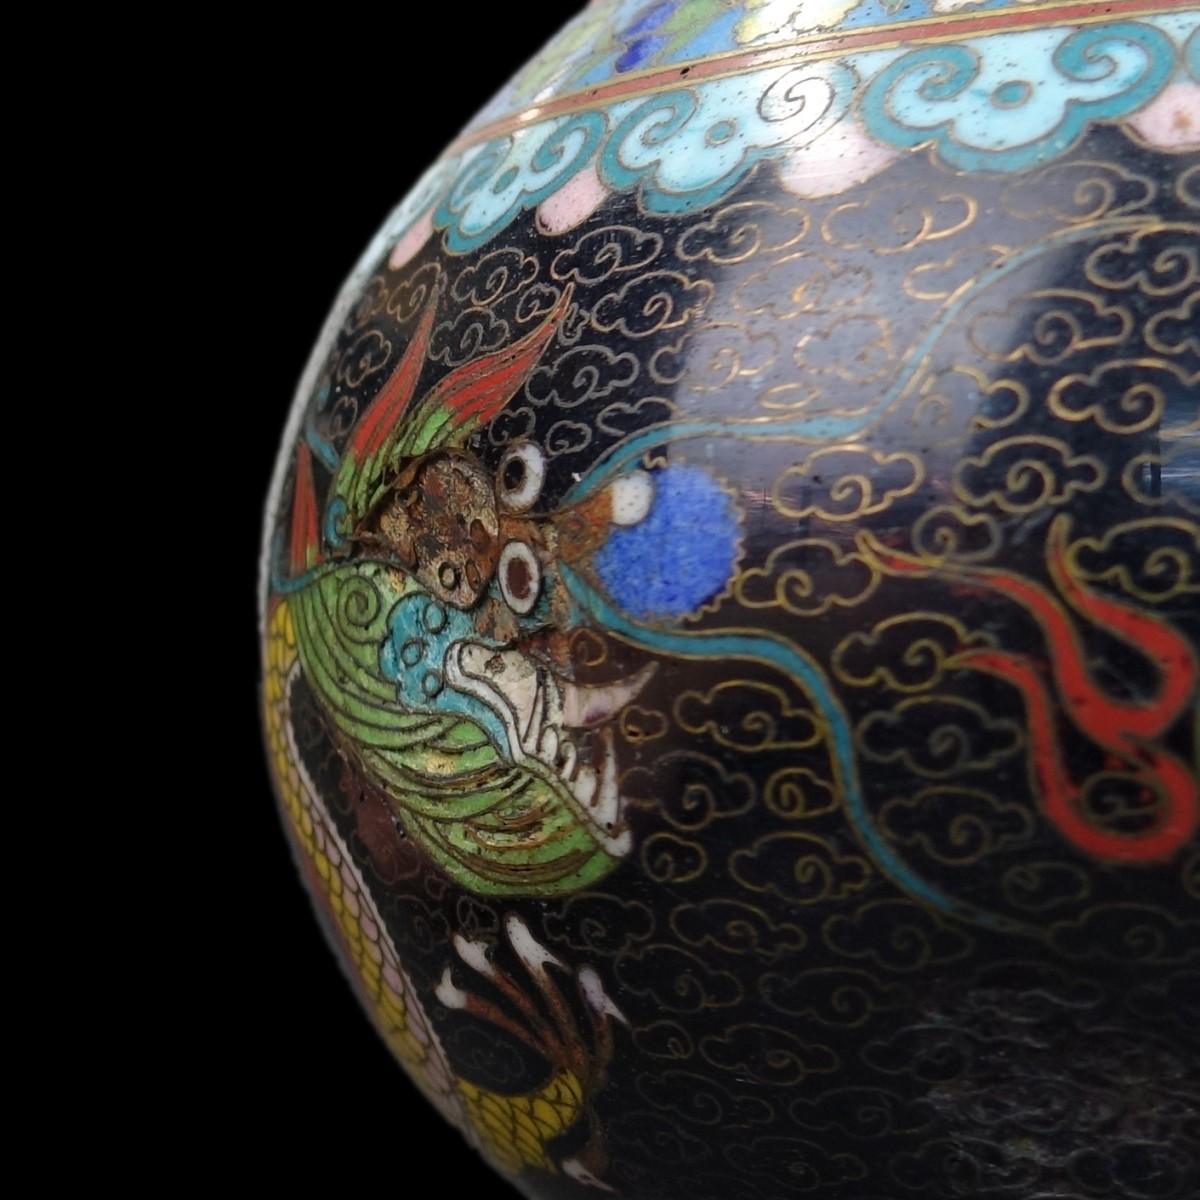 4 Chinese Cloisonne Vases